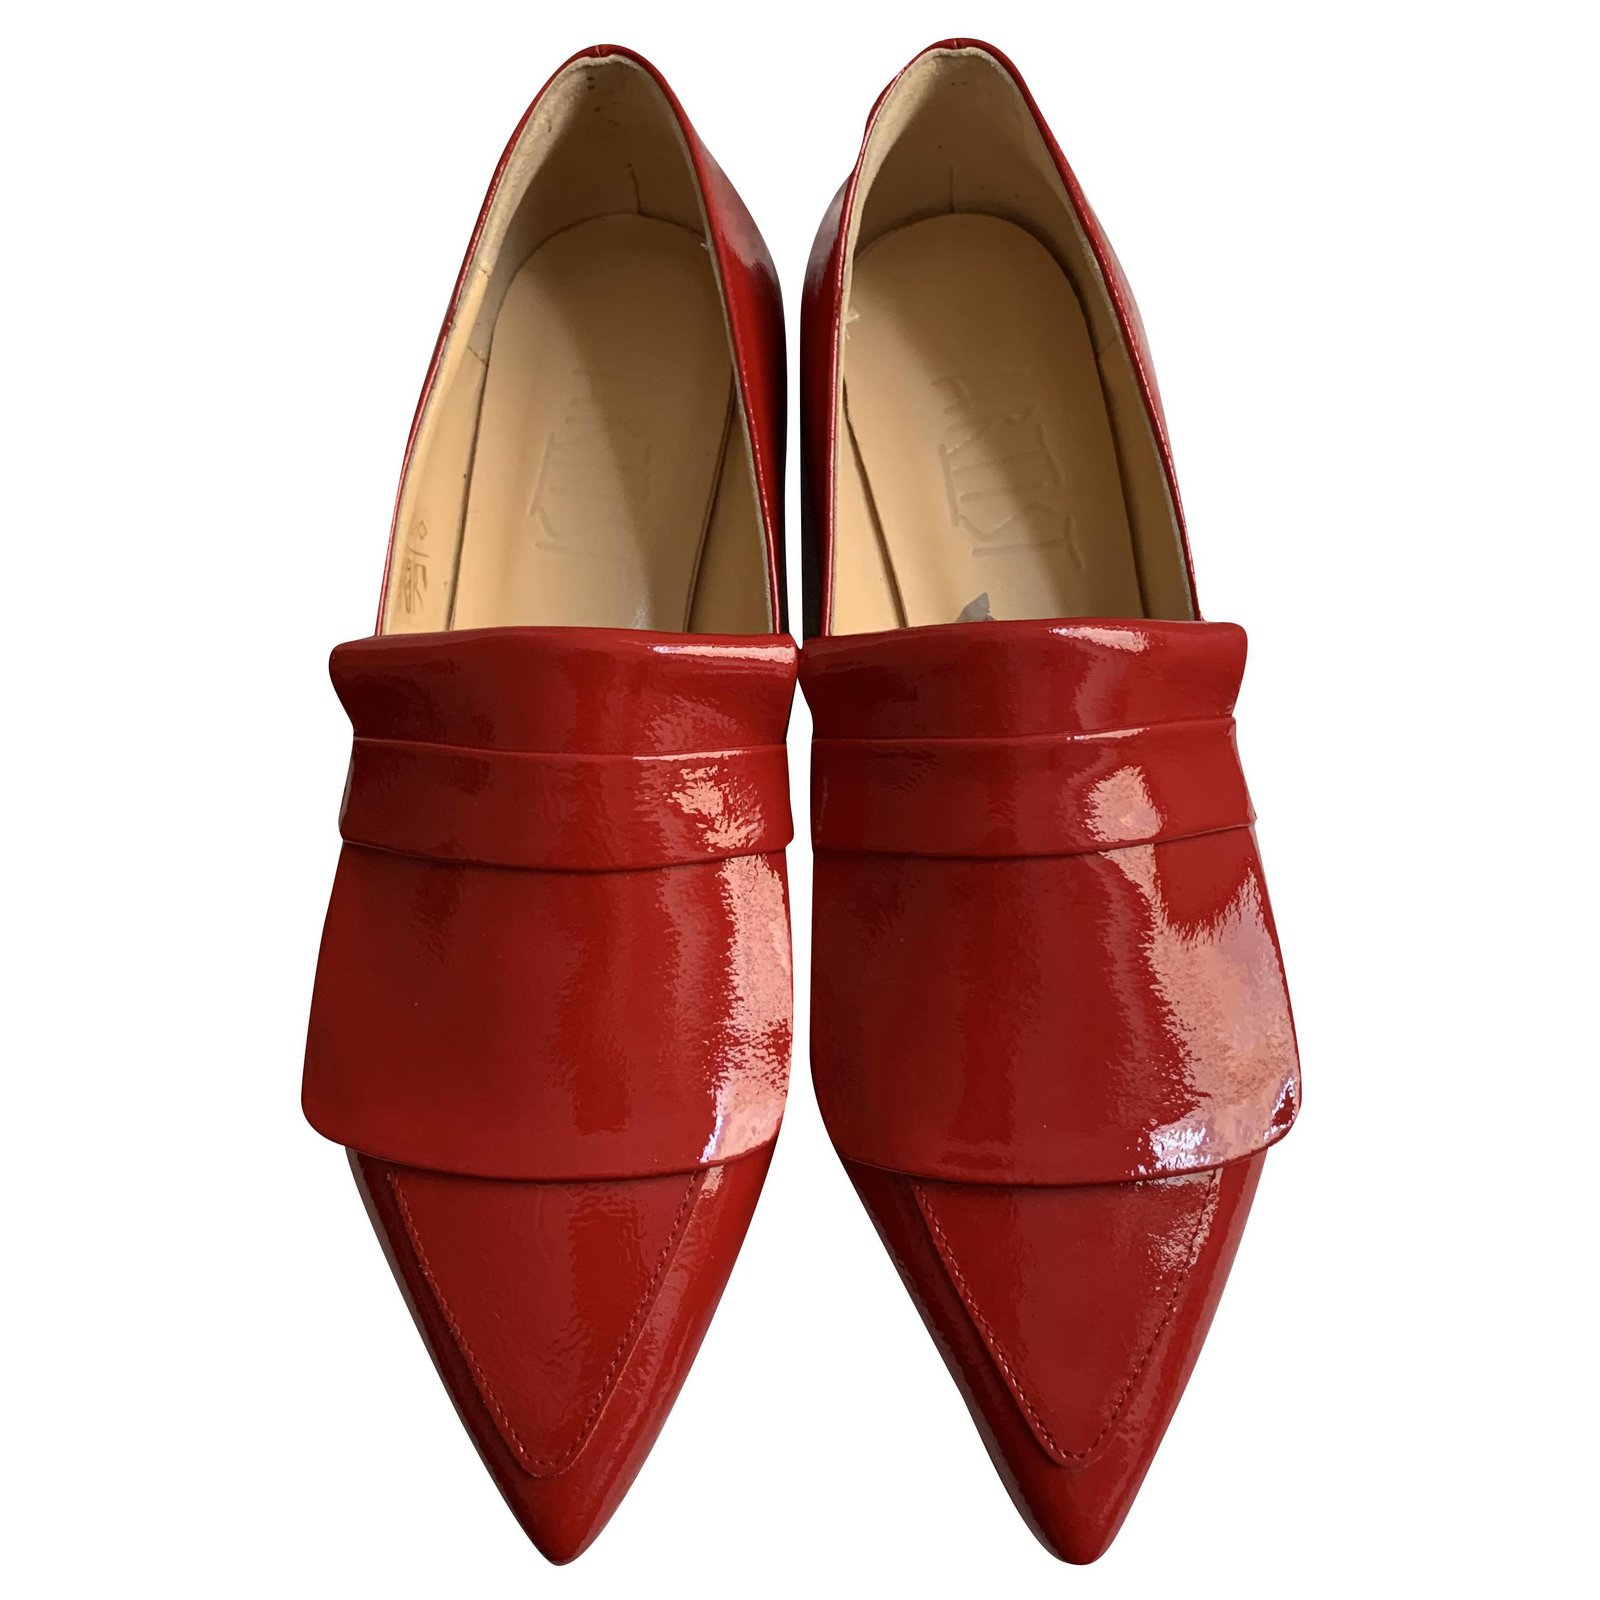 red patent leather flats